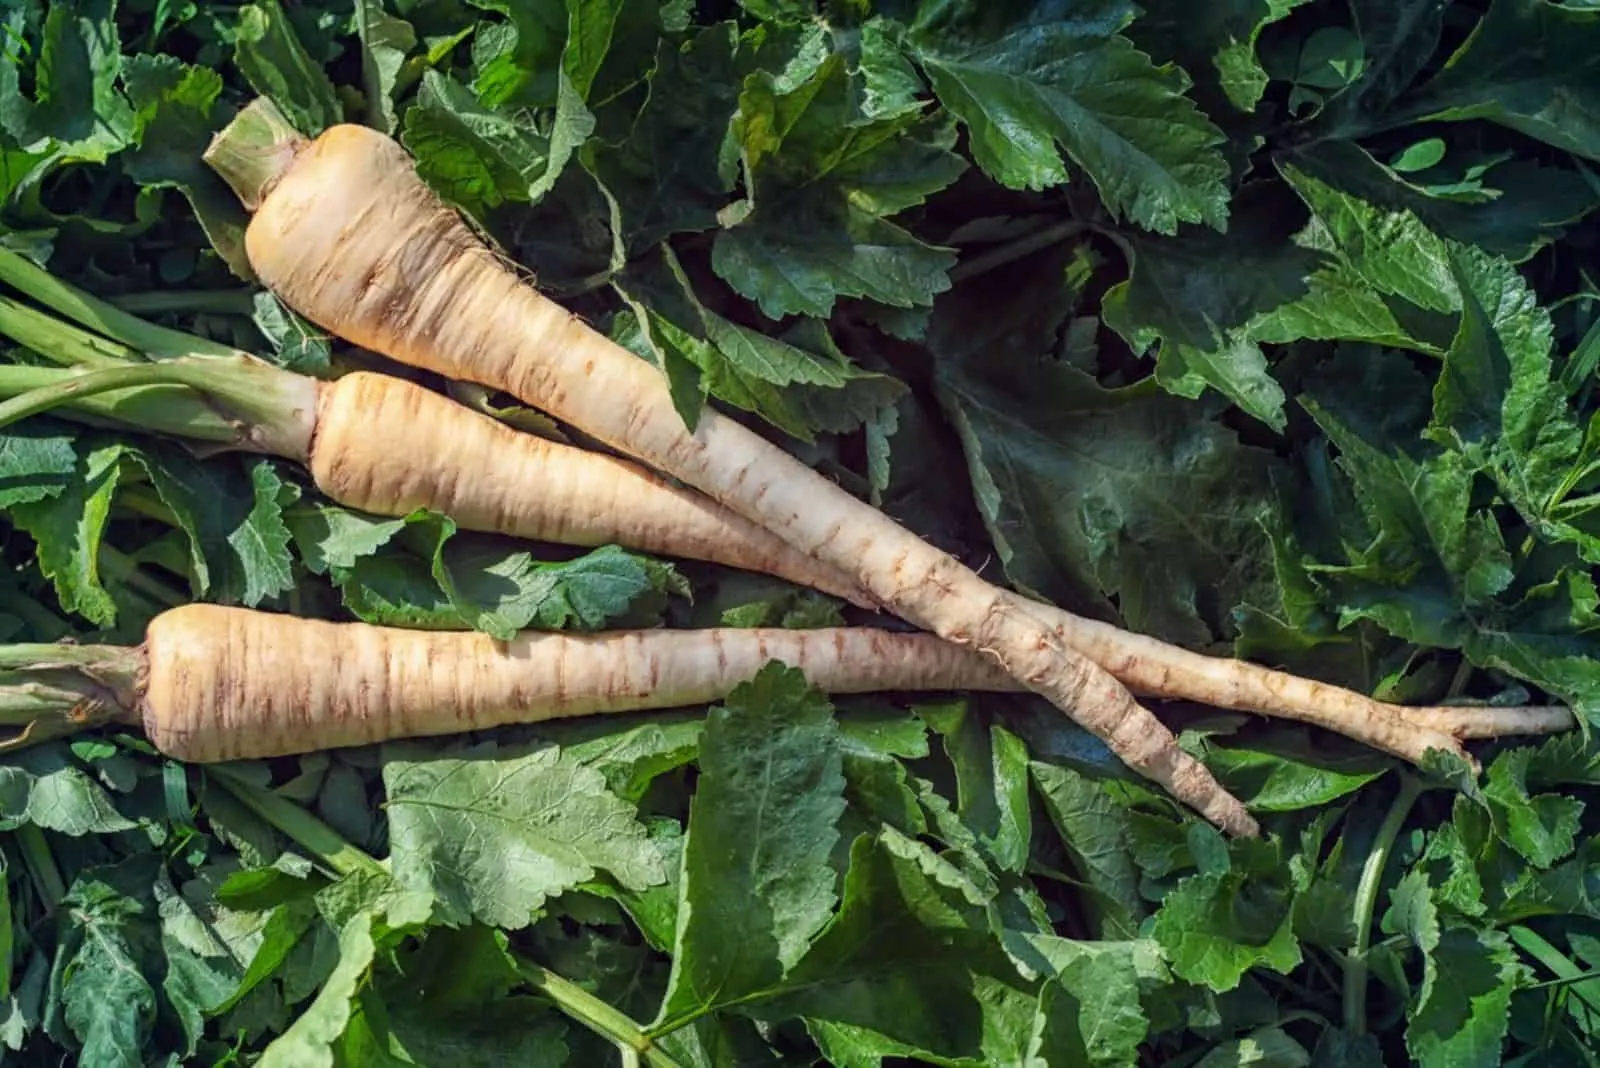 Parsnip - a bunch of fresh parsnips with green leaves